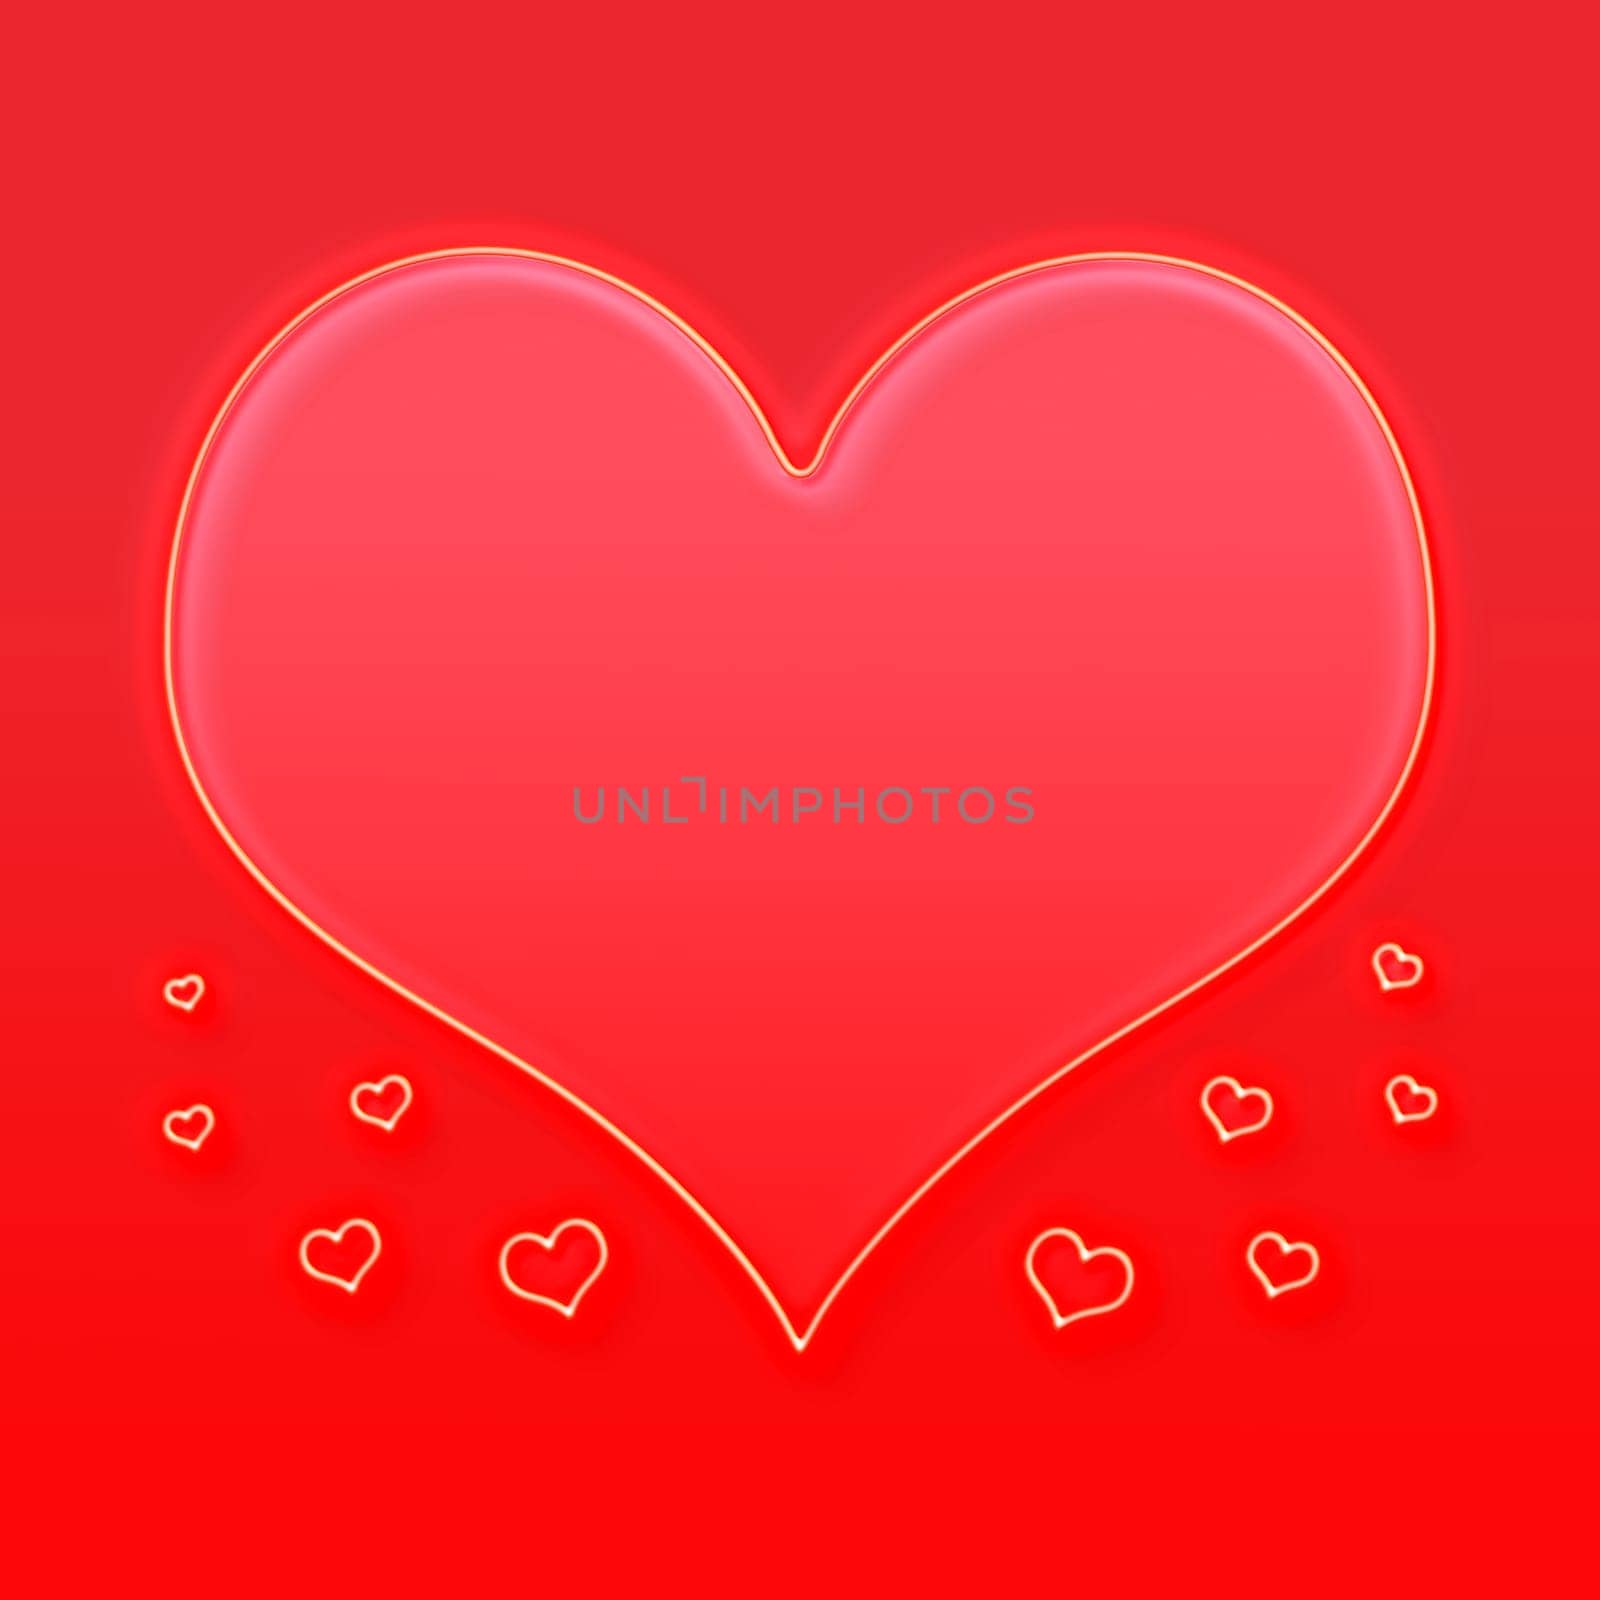 A large glowing red love heart with small hearts floating around it.